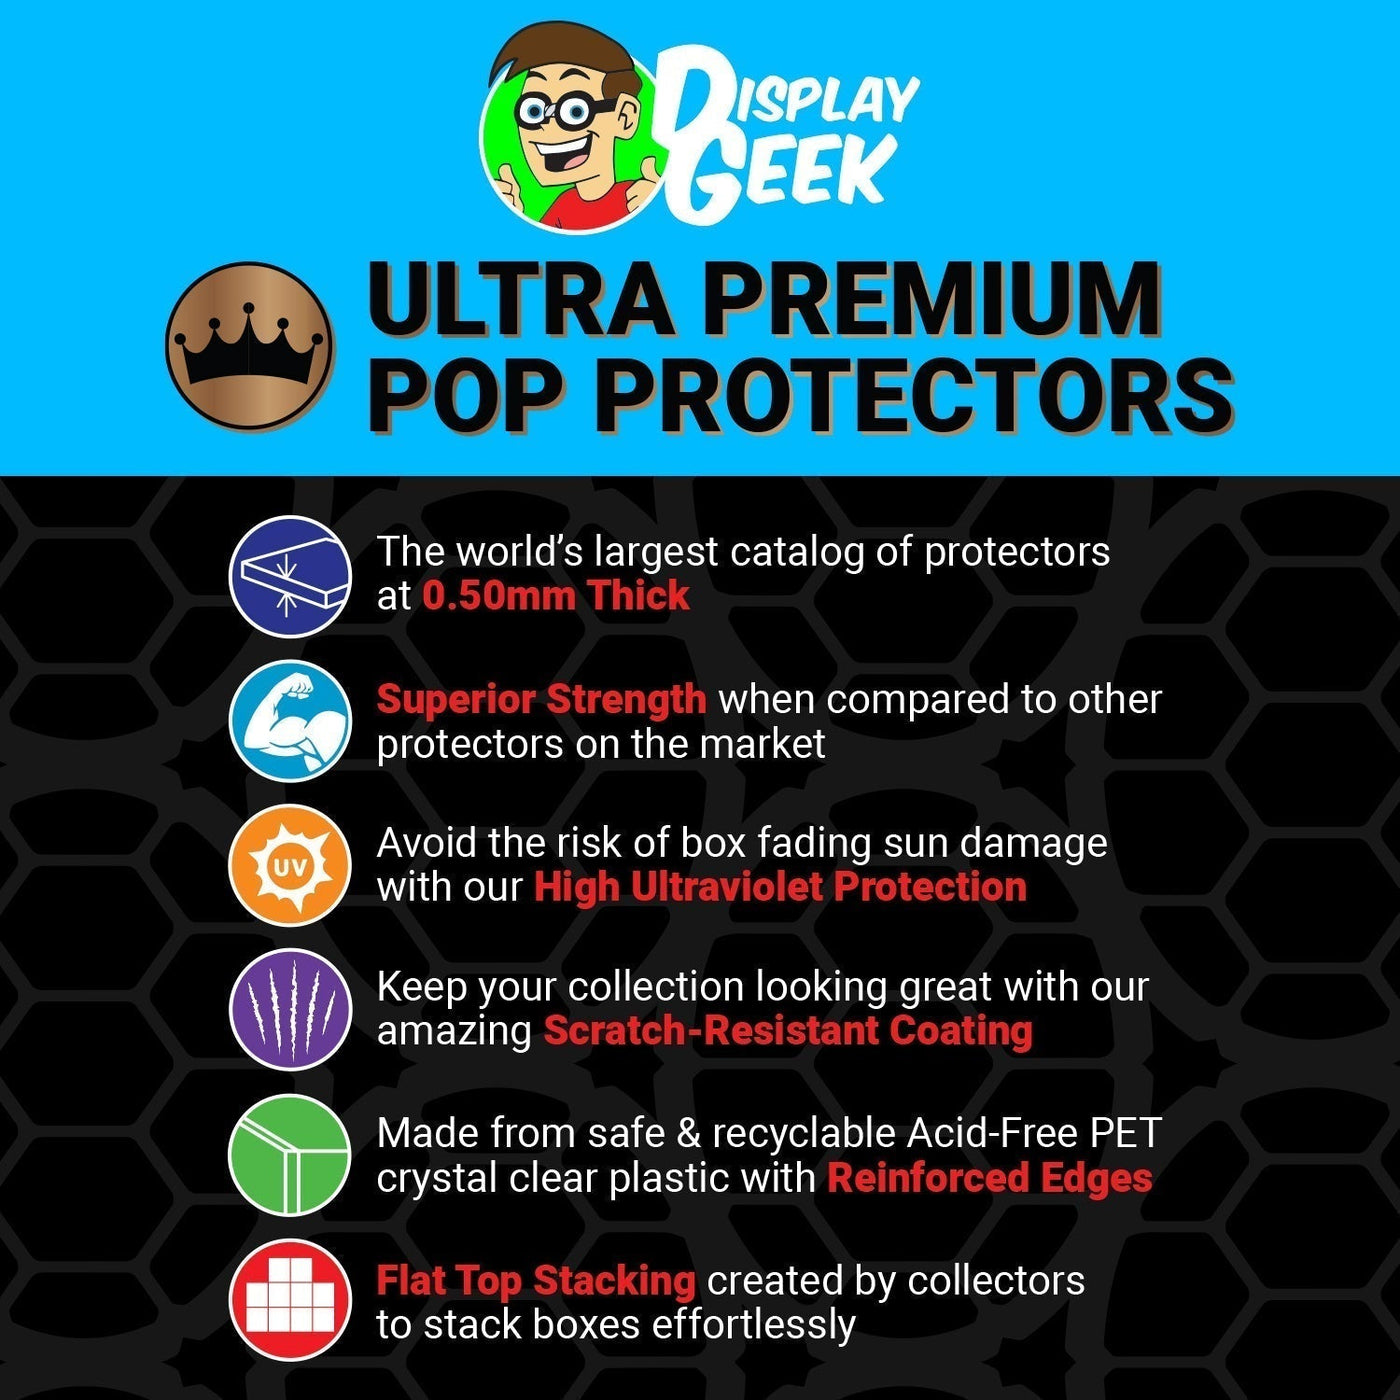 Pop Protector for Pop & Tee Balloon Foxy Flocked #907 Funko Box on The Protector Guide App by Display Geek